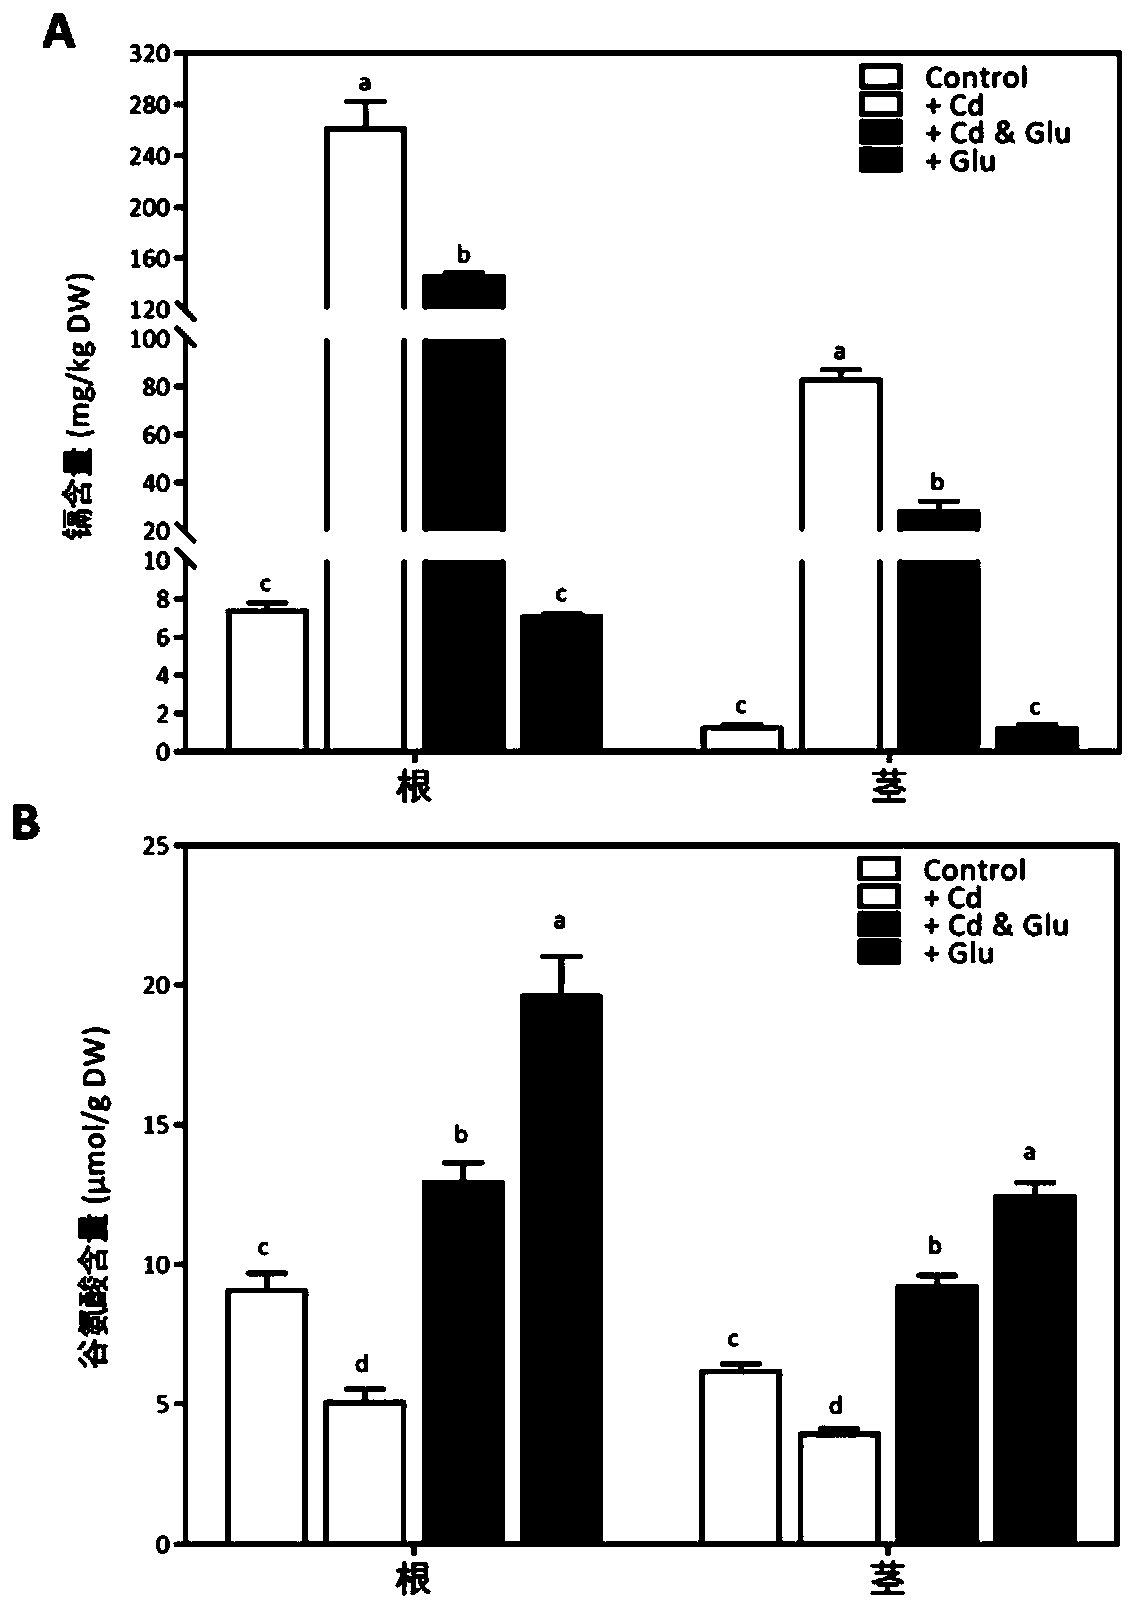 Application of exogenous glutamic acid in alleviating cadmium stress of rice and reducing cadmium content of rice plants